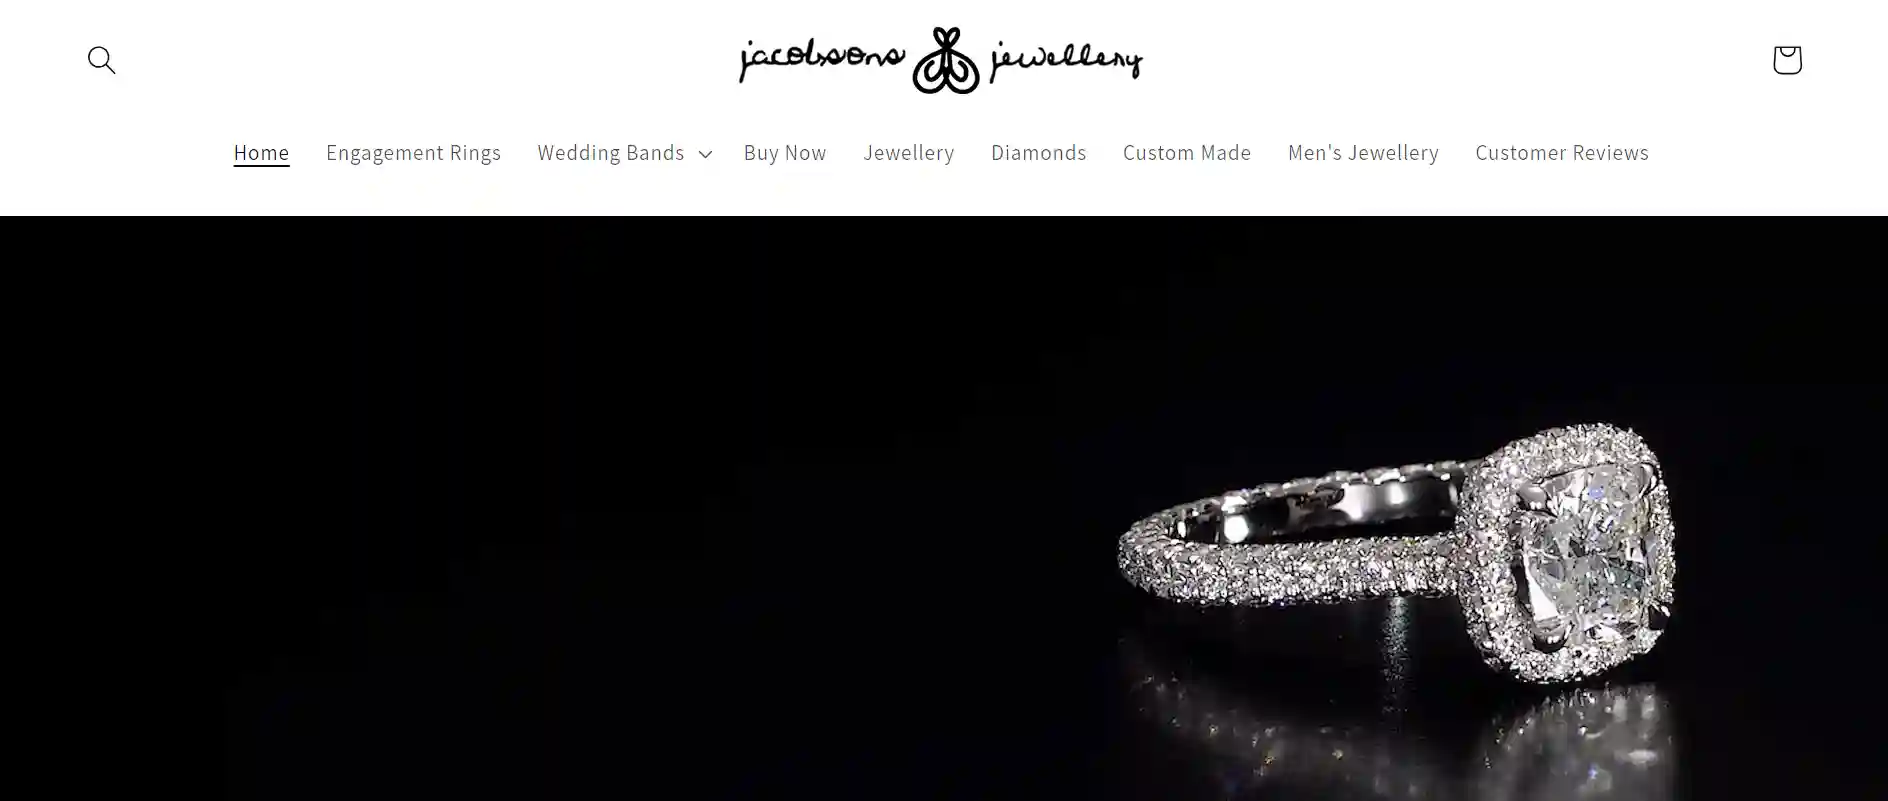 You are currently viewing Jacobsen Jewelry Reviews – Comprehensive Reviews and Analysis